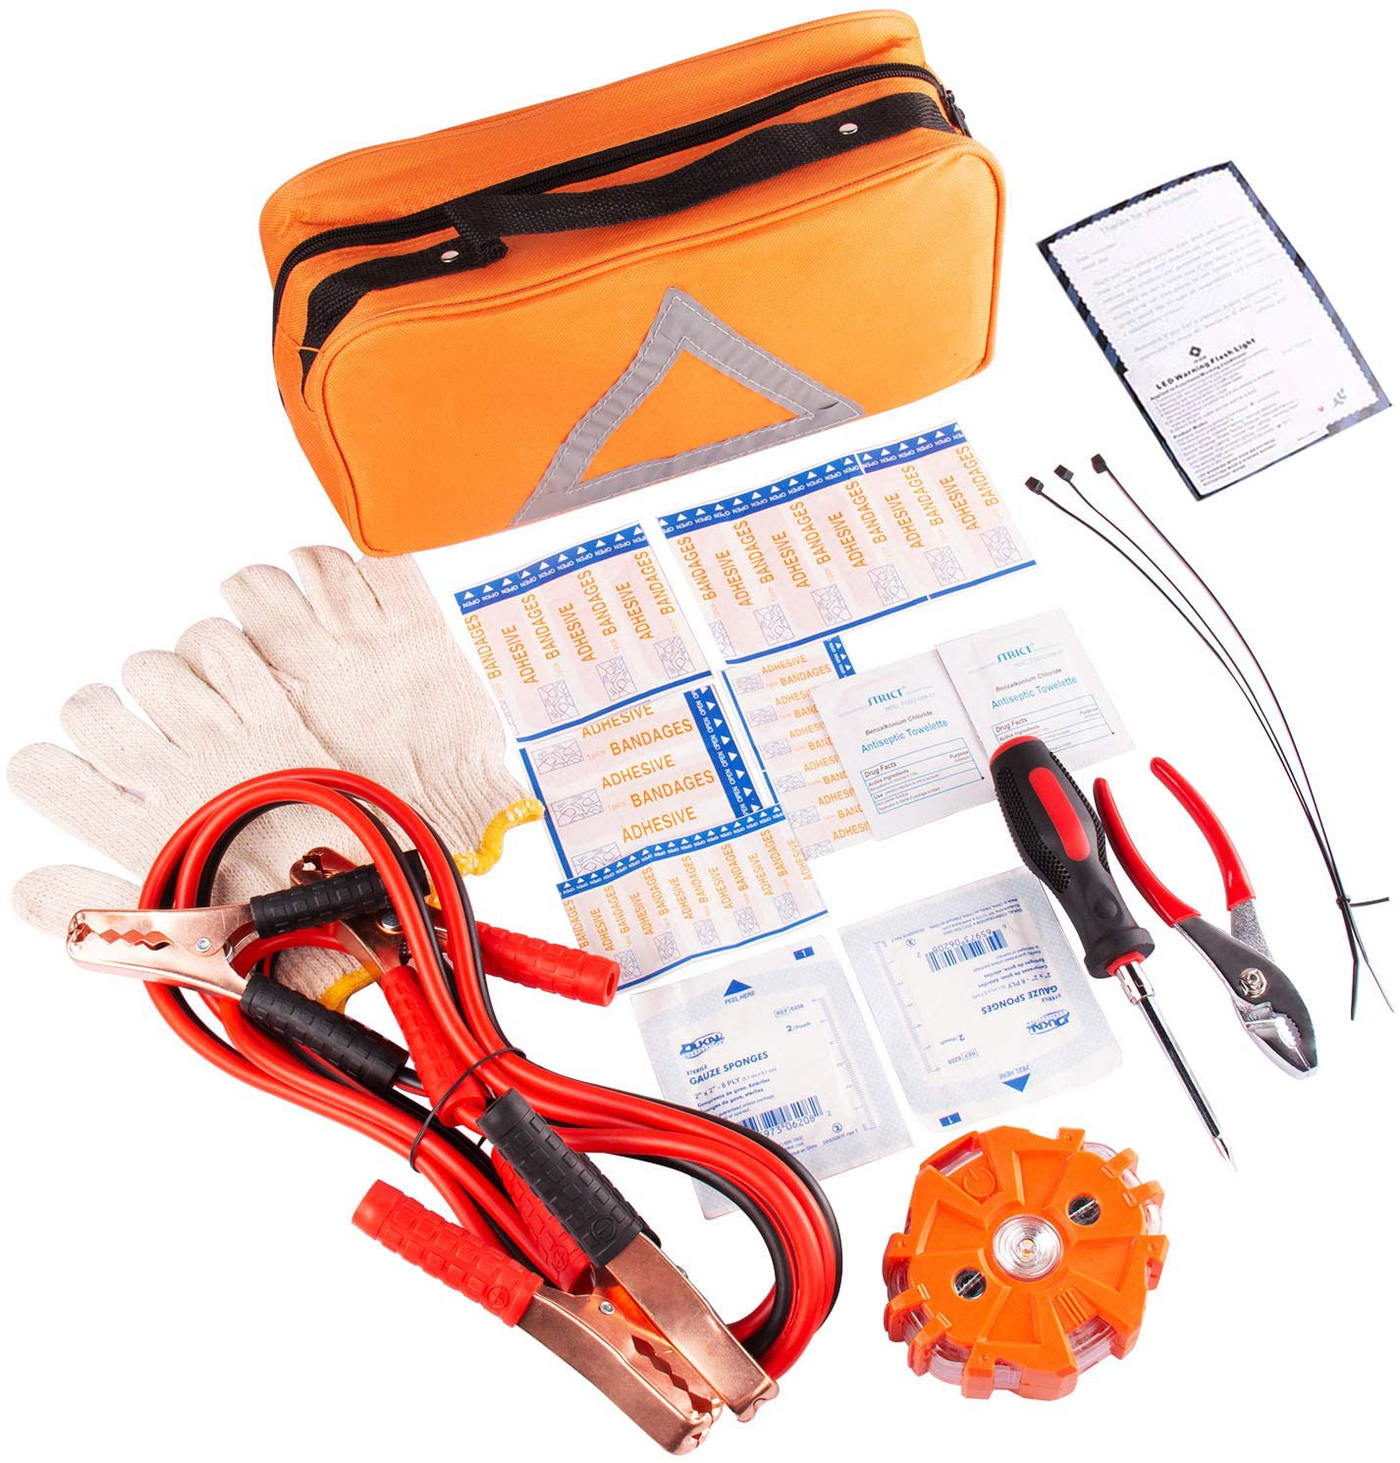 Emergency Roadside Assistance Safety Kit - First Aid Kit, Jumper Cables, LED Warning Light, Work Gloves, Tools and More